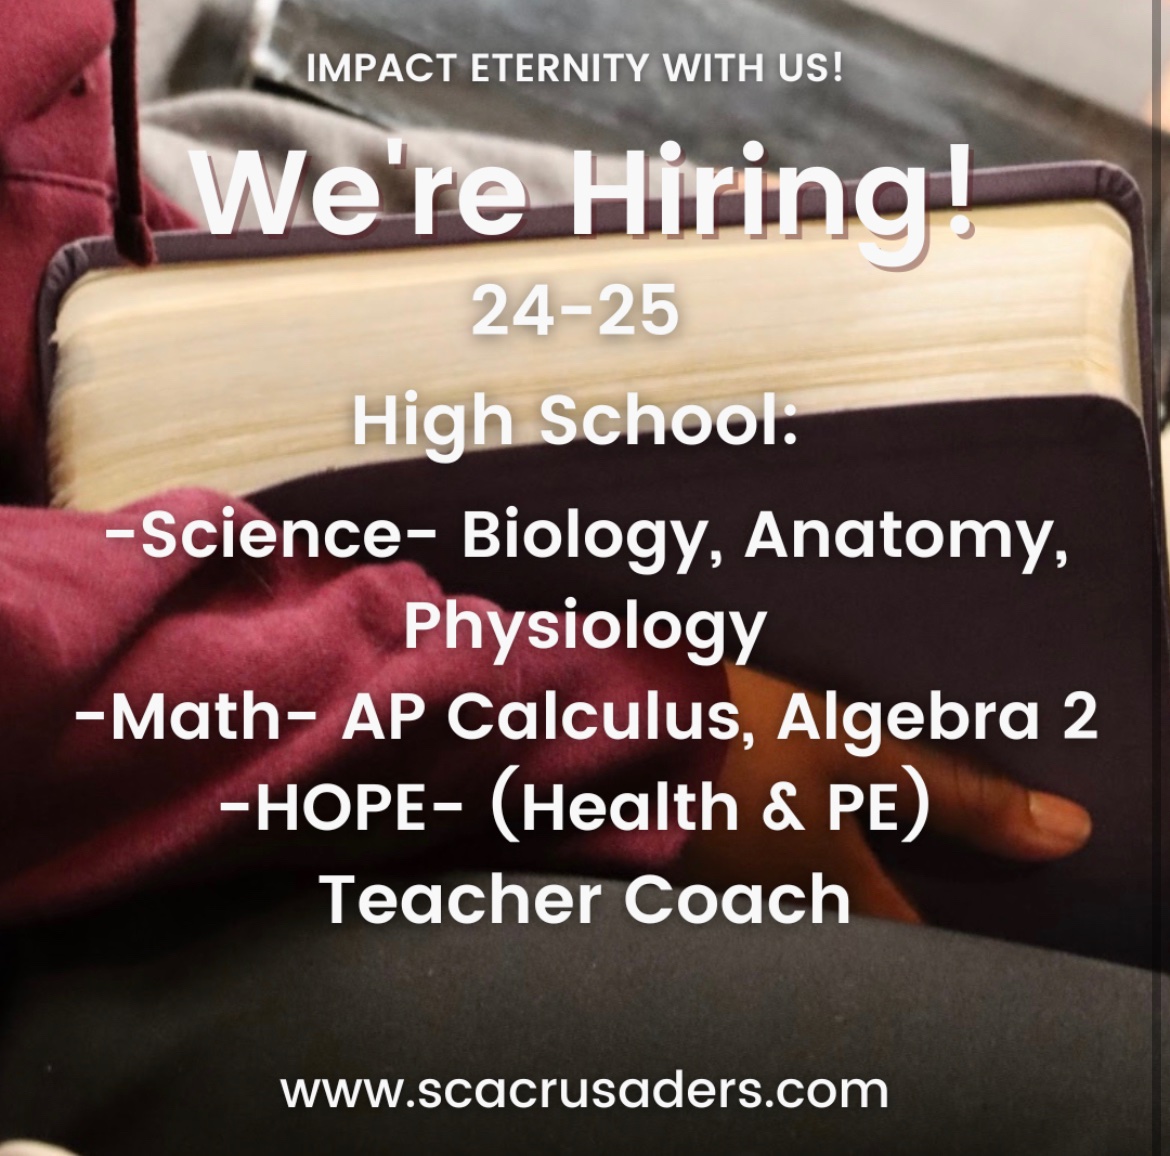 If you, or someone you know, loves working with students, we invite you to apply to work in our High School department. Visit our website for more information. scacrusaders.com